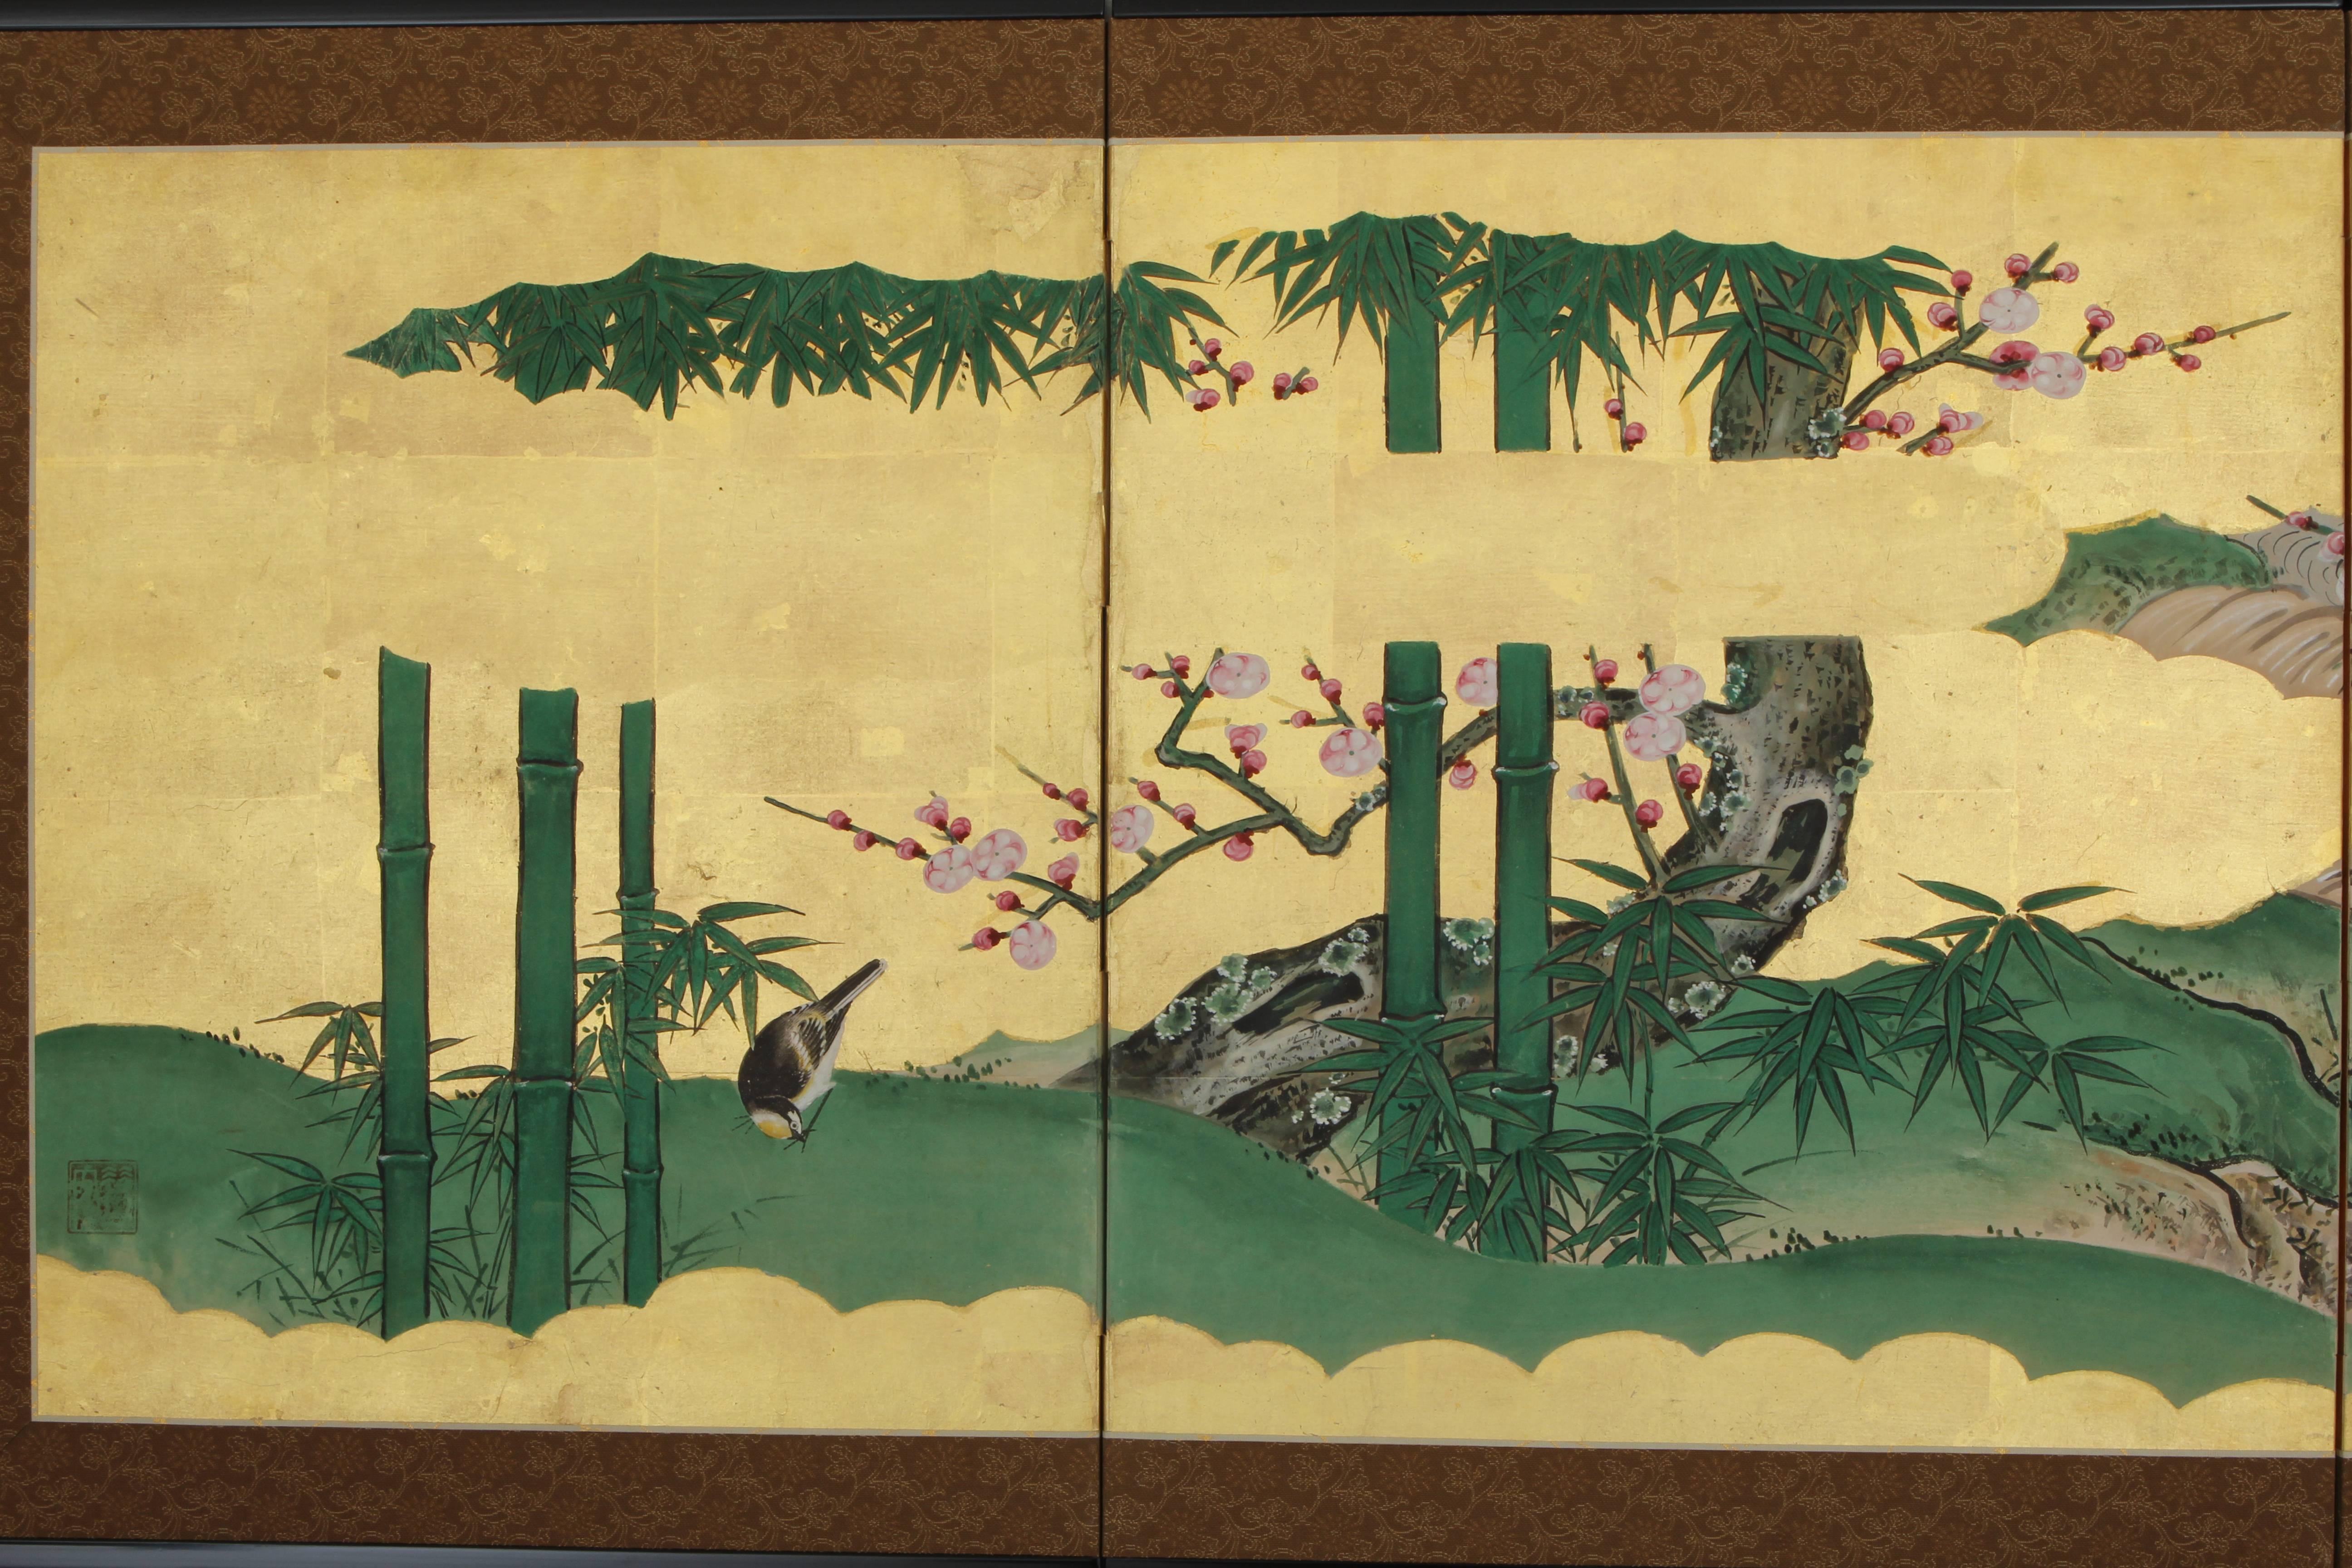 Six-panel folding screen with a scene of birds flying over a flowering plum and bamboo by a stream. Painting in ink and mineral colors on paper with gold leaf. Artist's square seal mark. Mounted with a silk-brocade border and framed with